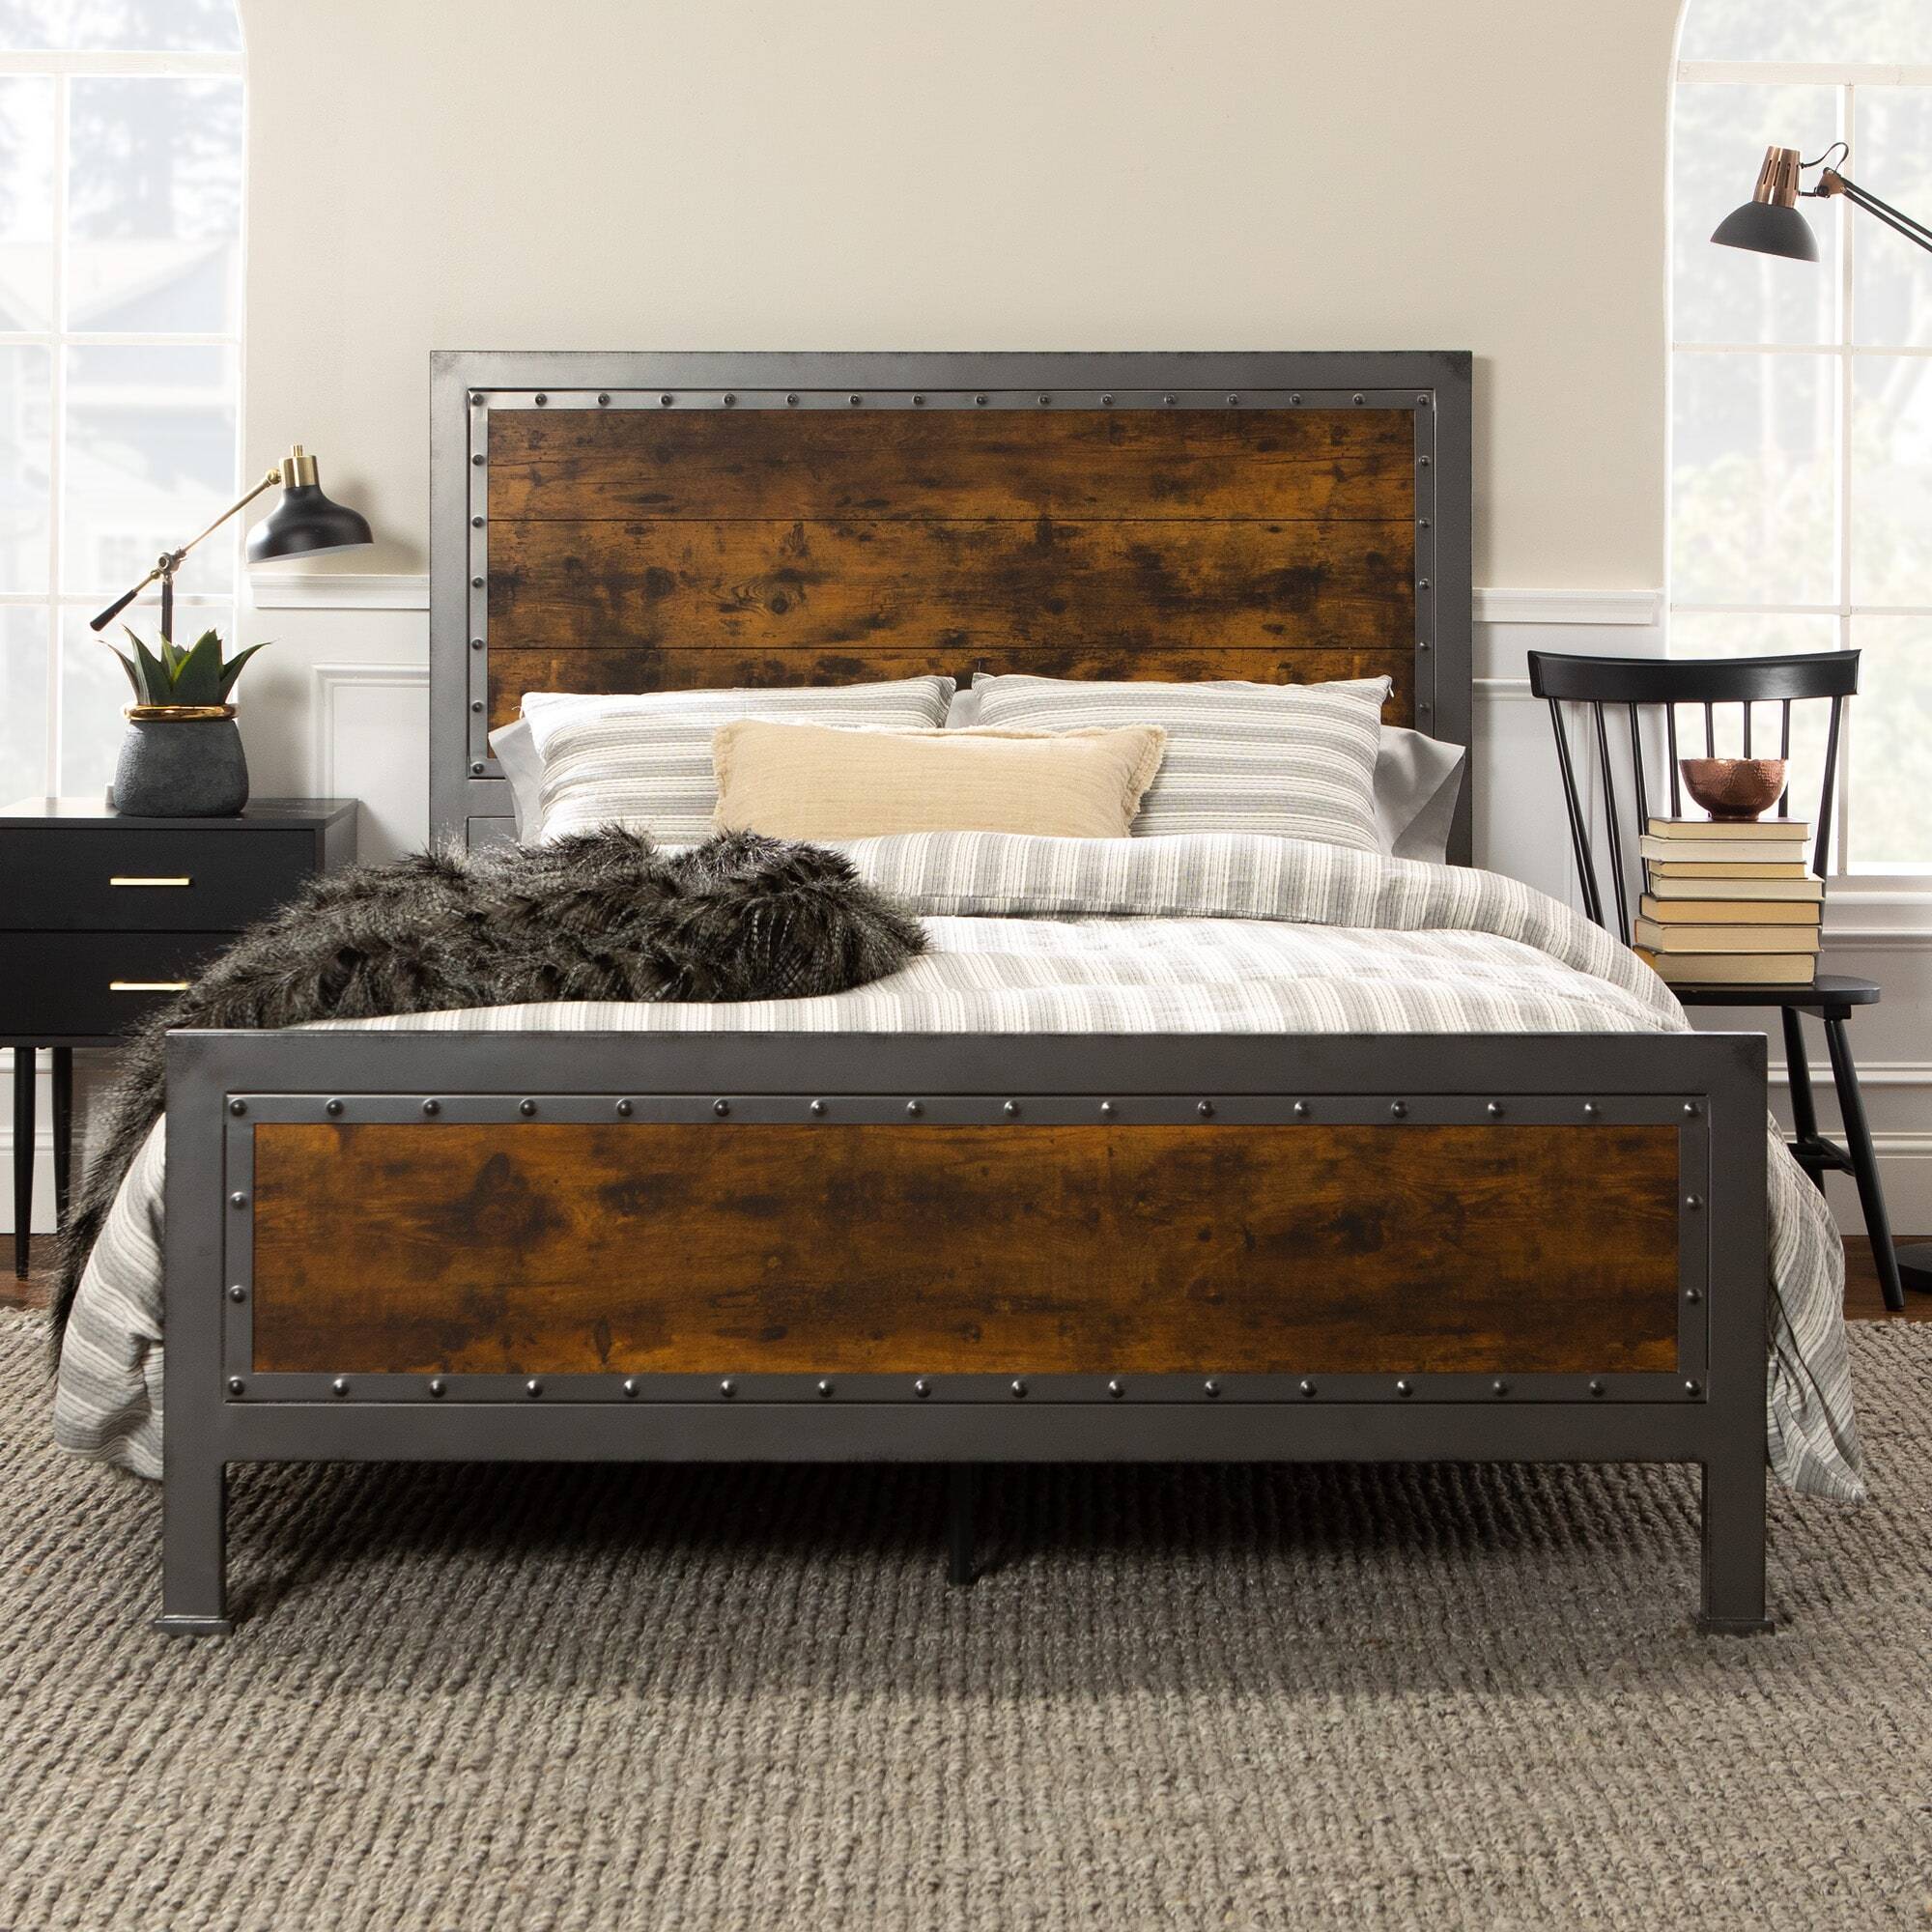 A rustic, industrial wood and iron bed